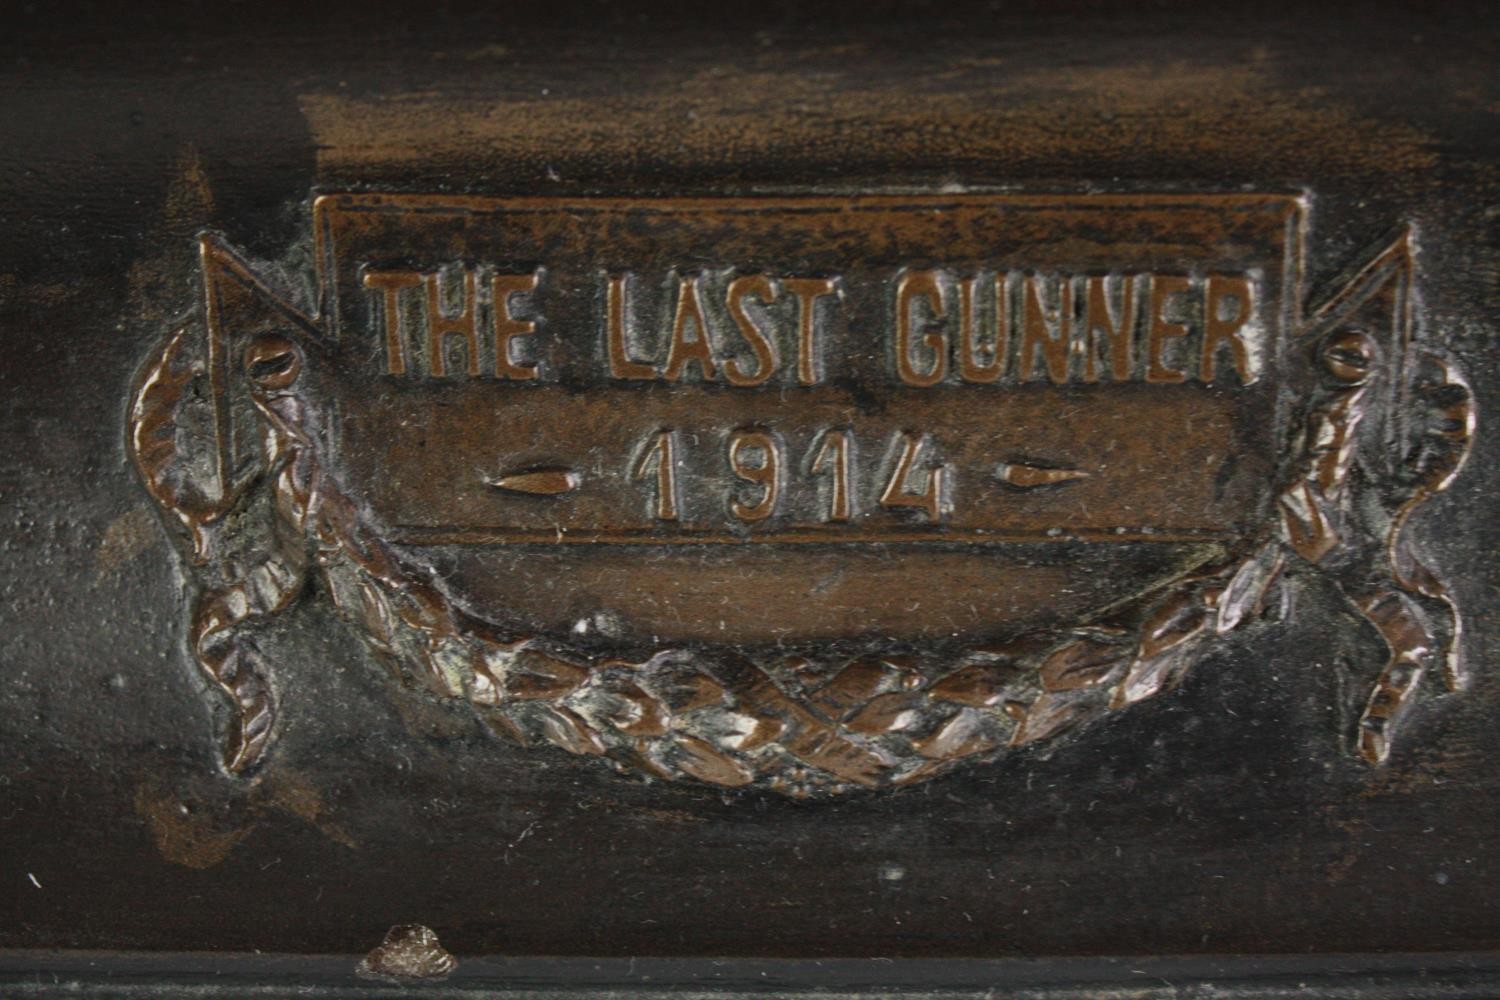 Vincent Gattai (active 1915). Titled on the plinth, 'The Last Gunner'. A lone artilleryman is - Image 10 of 10